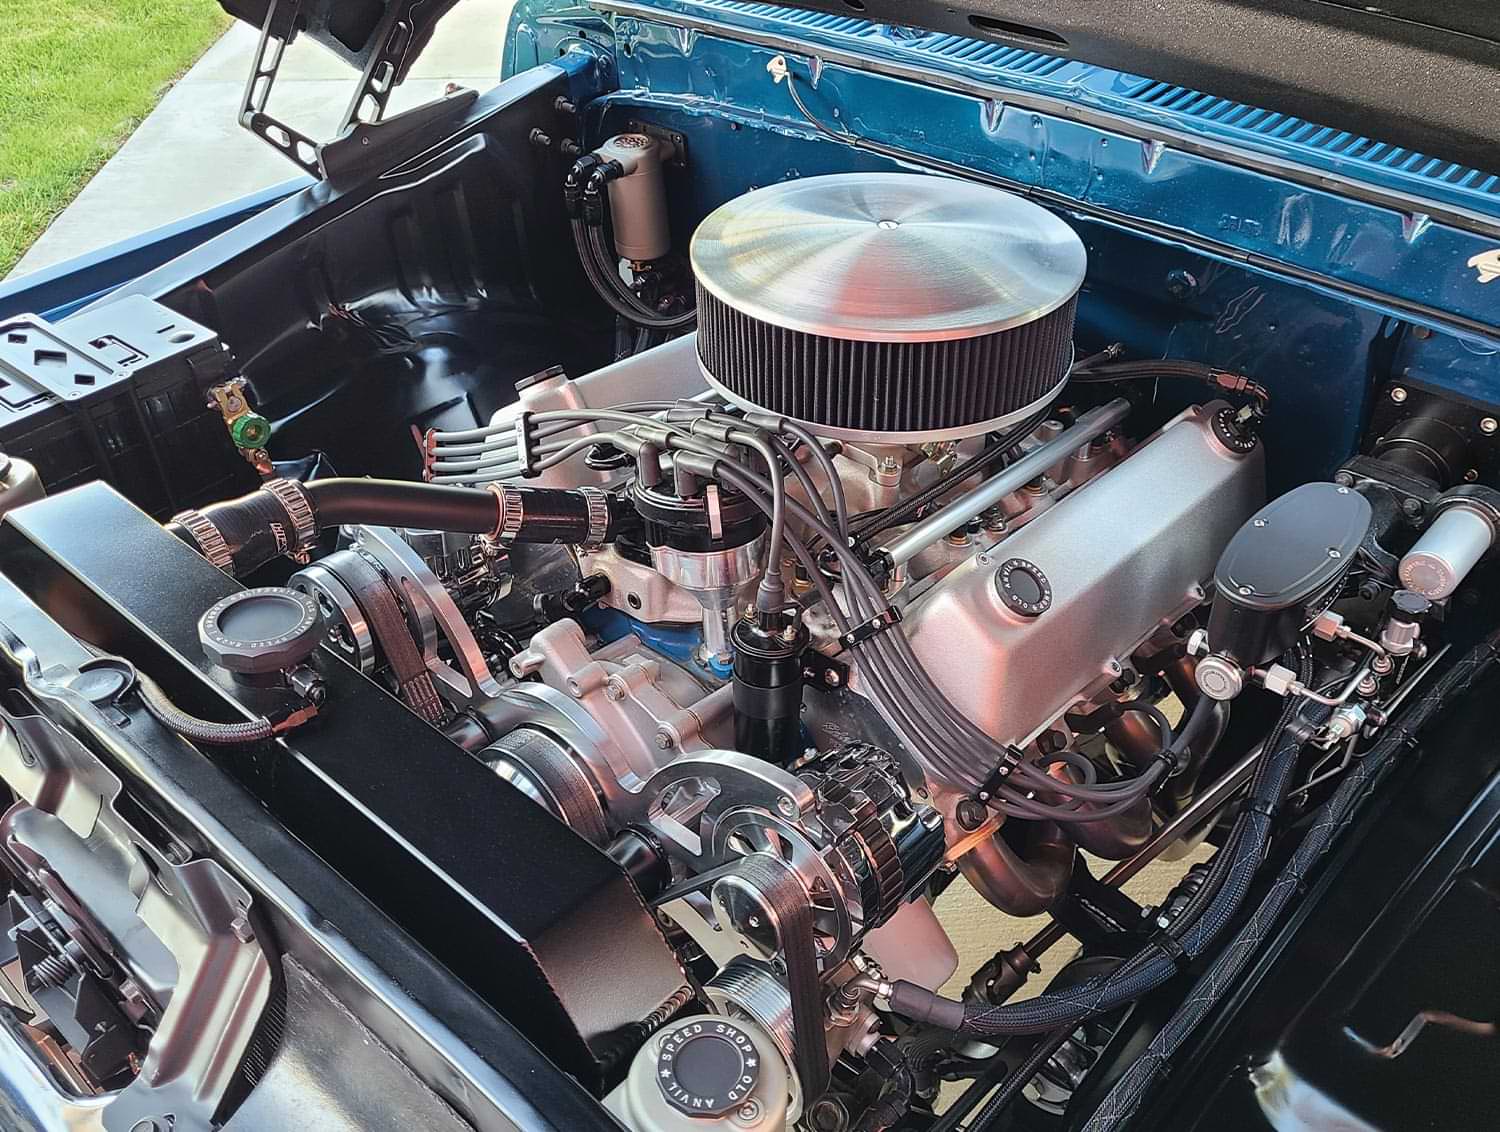 the ’75 Ford SuperCab engine